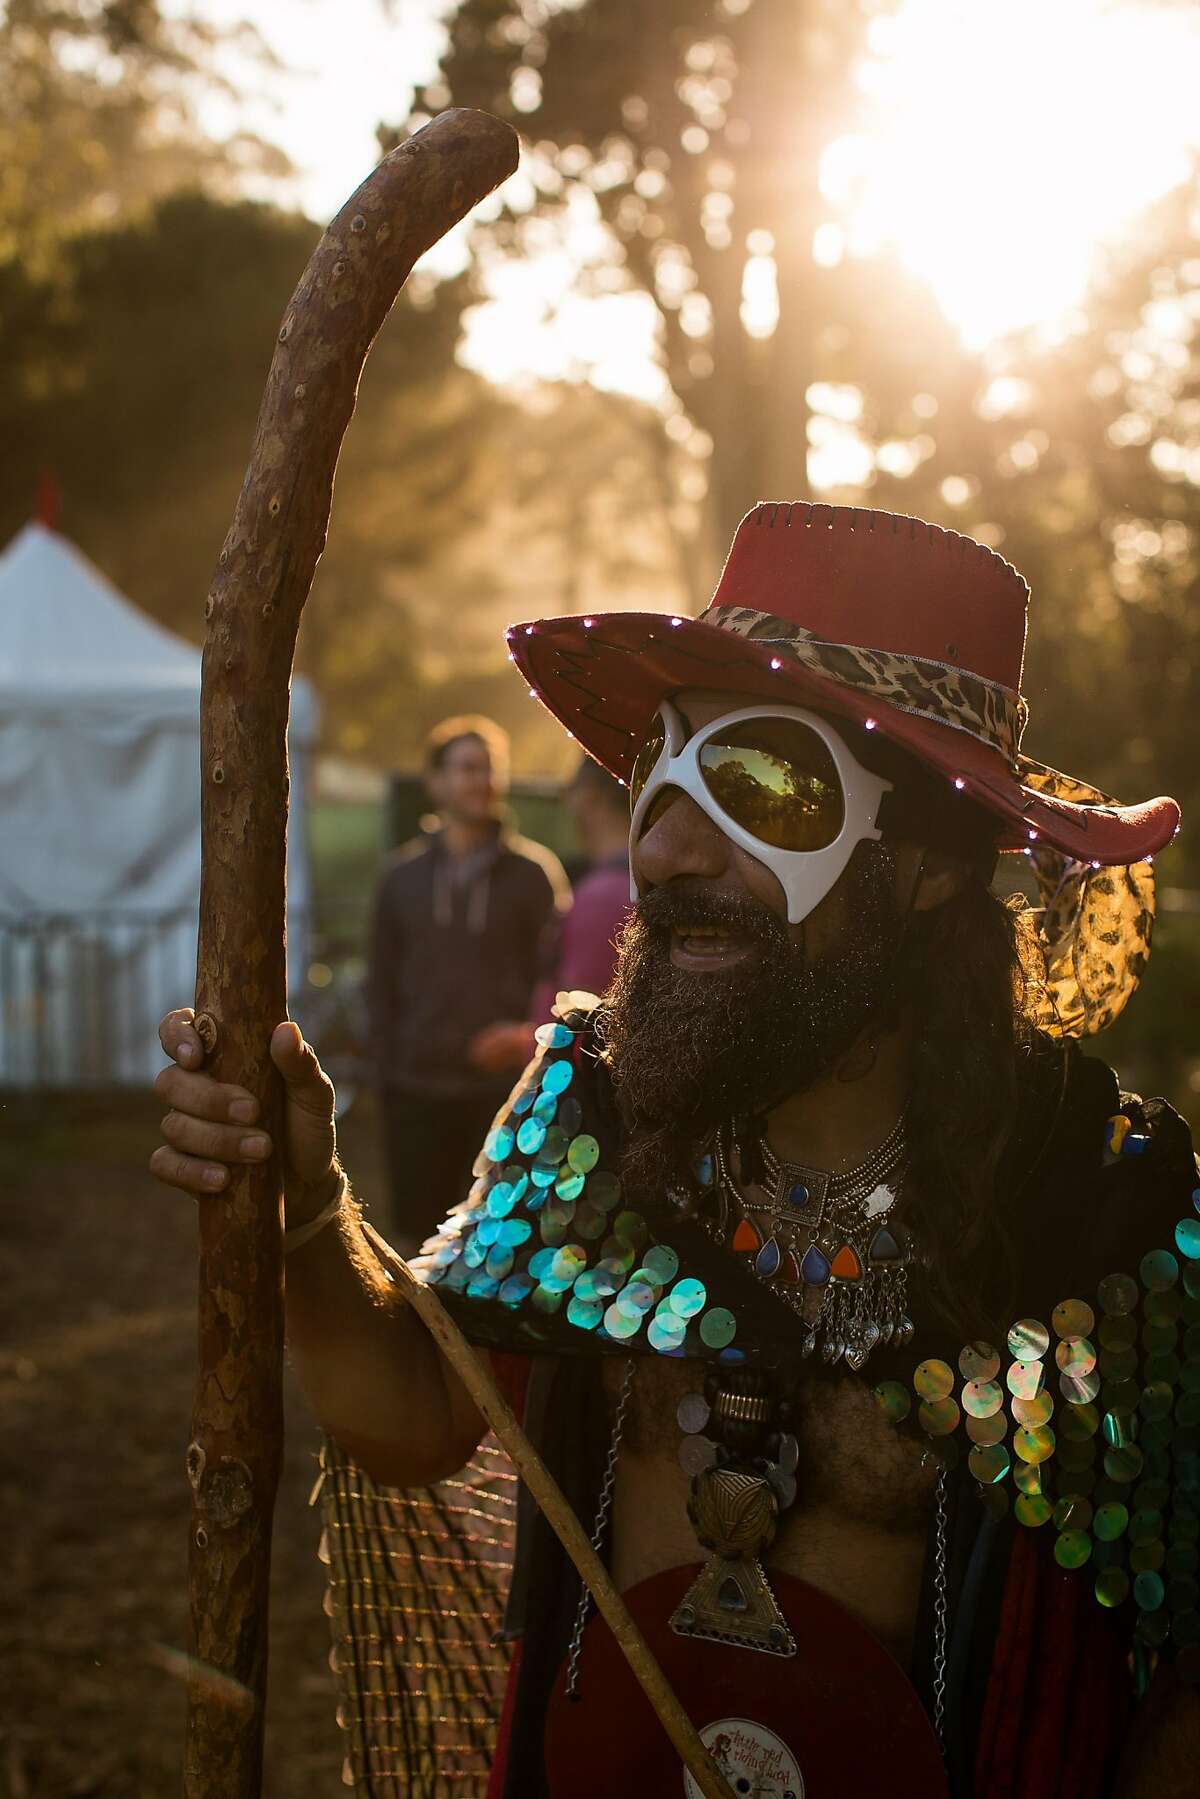 Robert E Micallef, aka the Merlin the Wizard, photographed during the Hardly Strictly Bluegrass in San Francisco, Calif. Saturday, October 7, 2017.